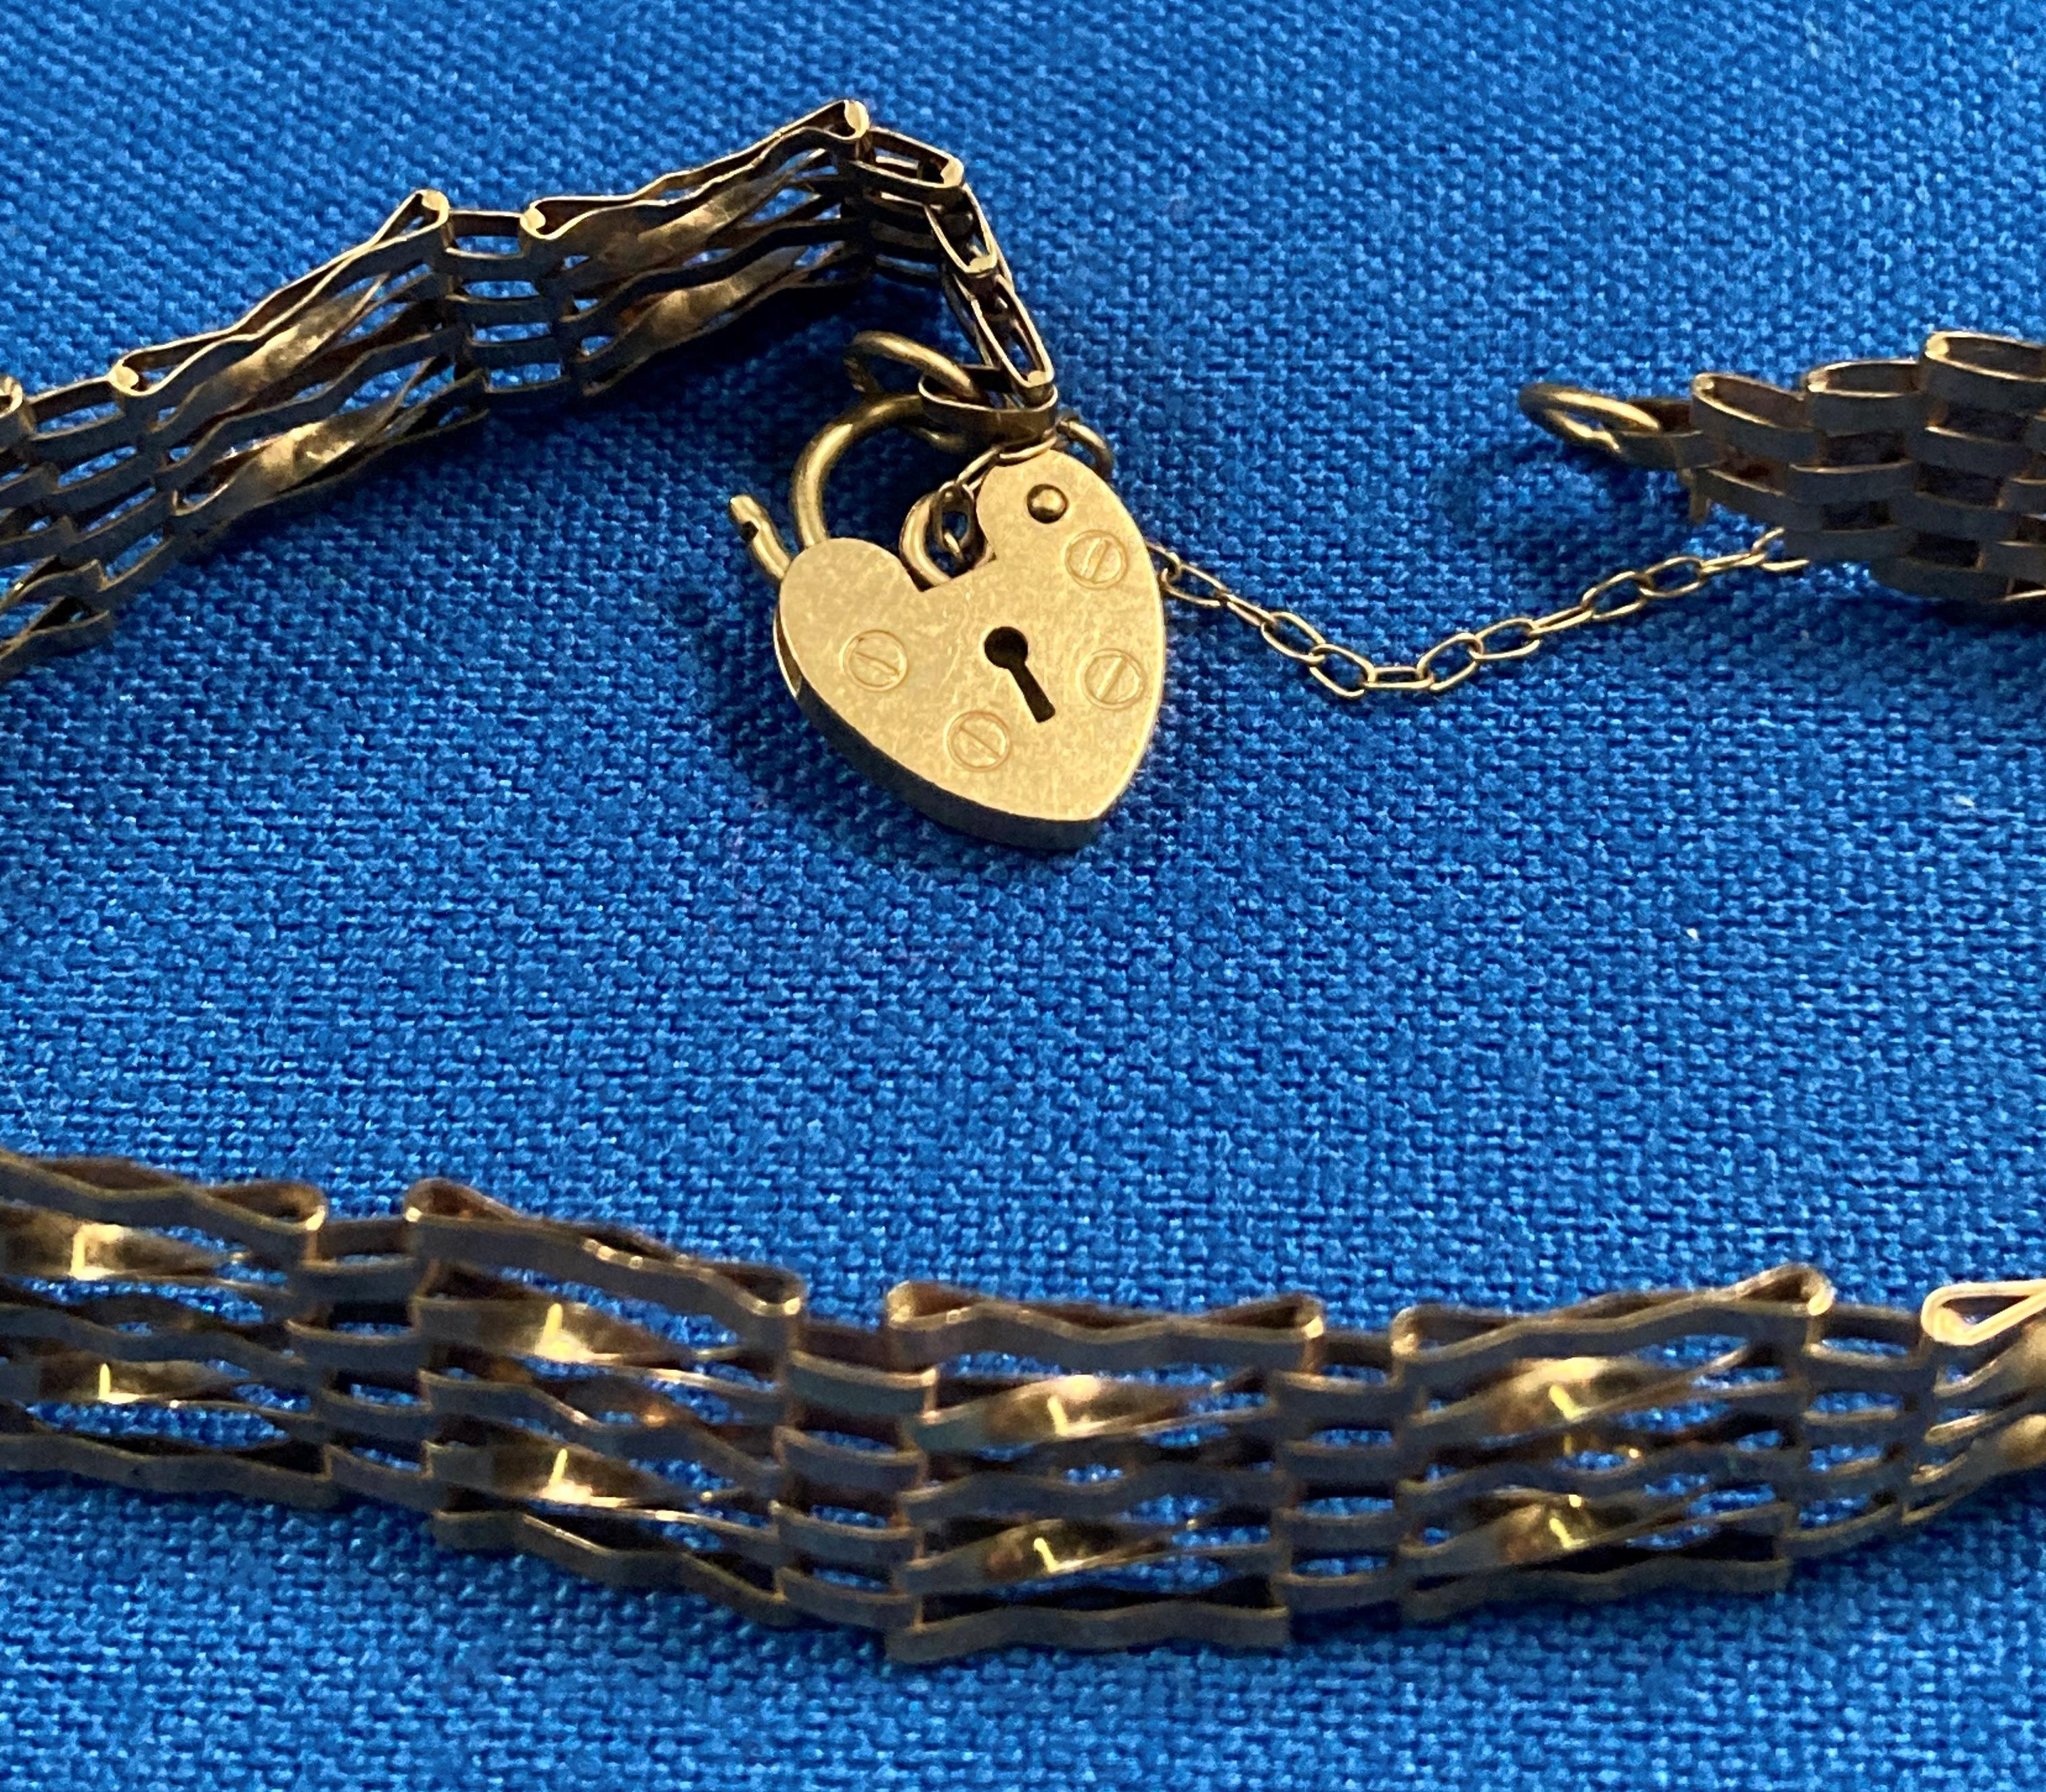 9ct gold (375) gate bracelet with heart-shaped lock clasp, approximately 7" long. Weight: 5. - Image 2 of 3